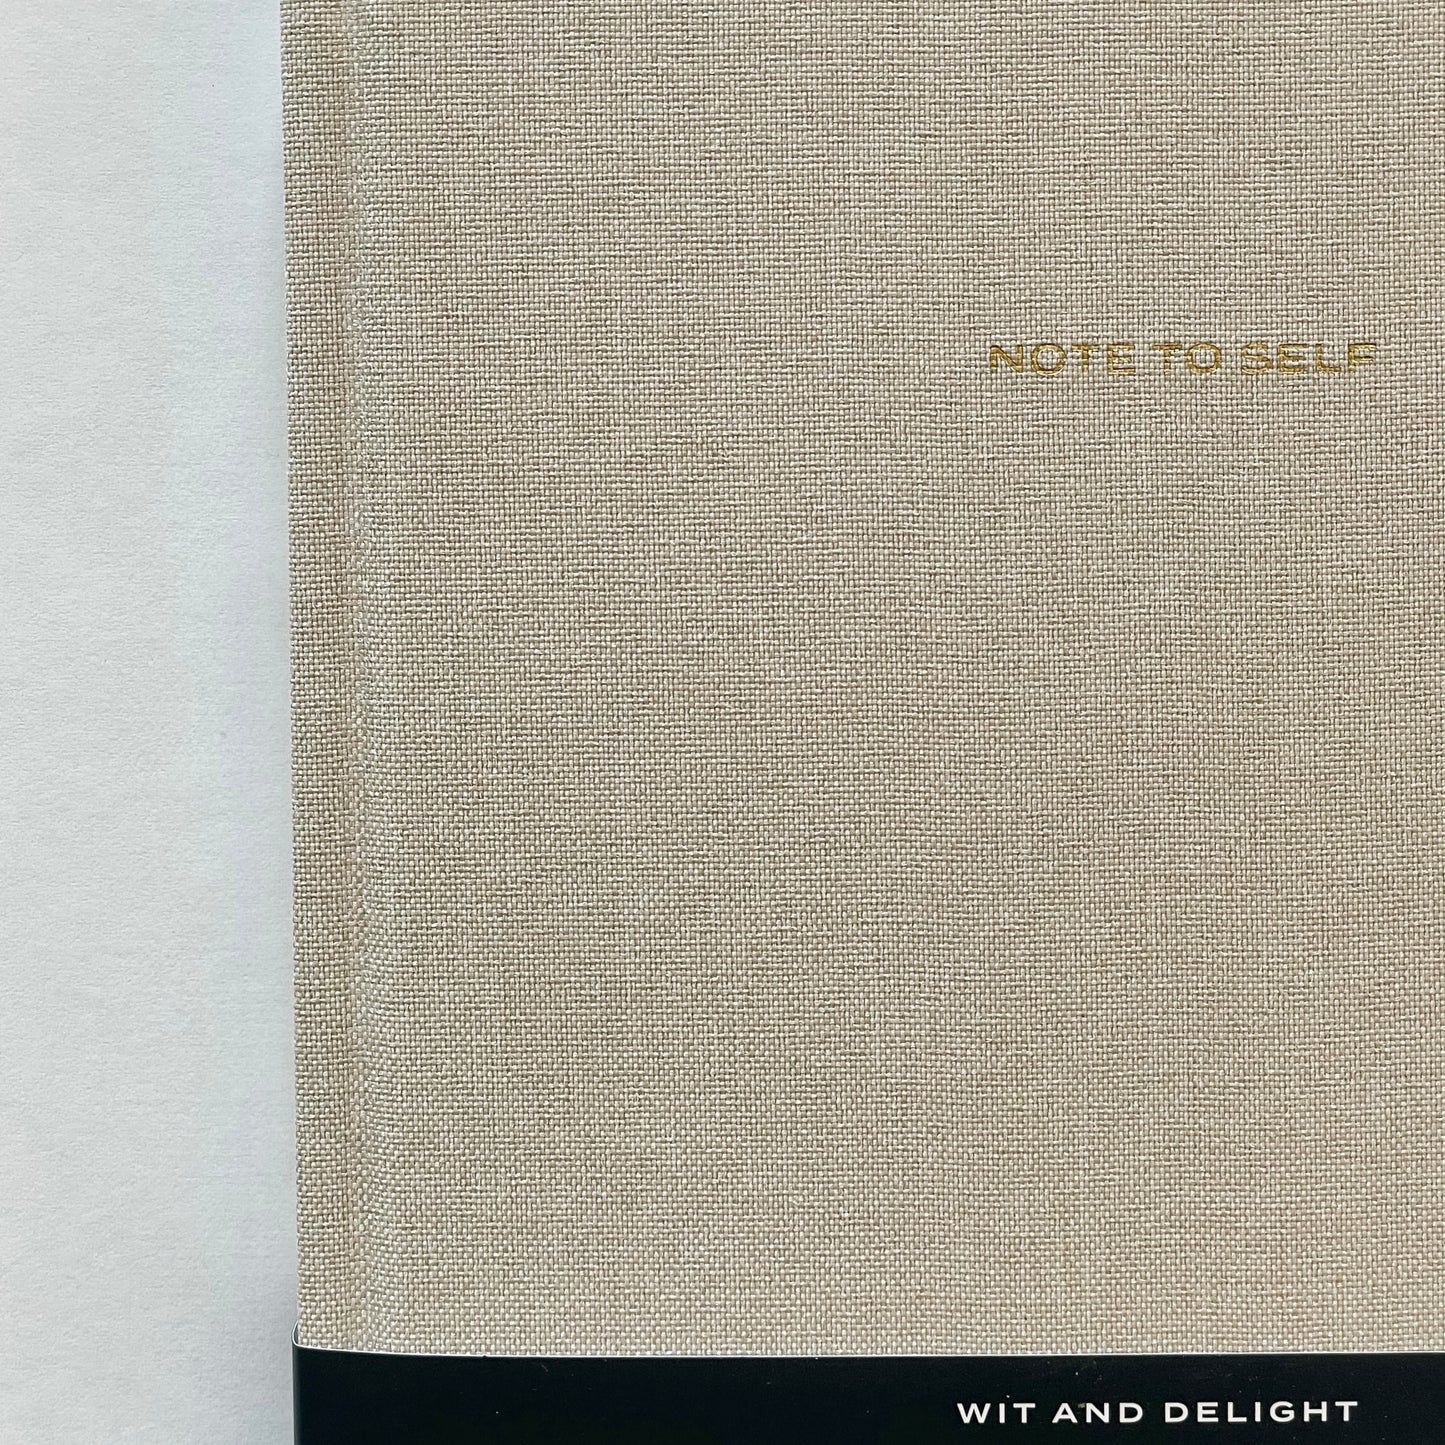 Note to Self Journal | Linen